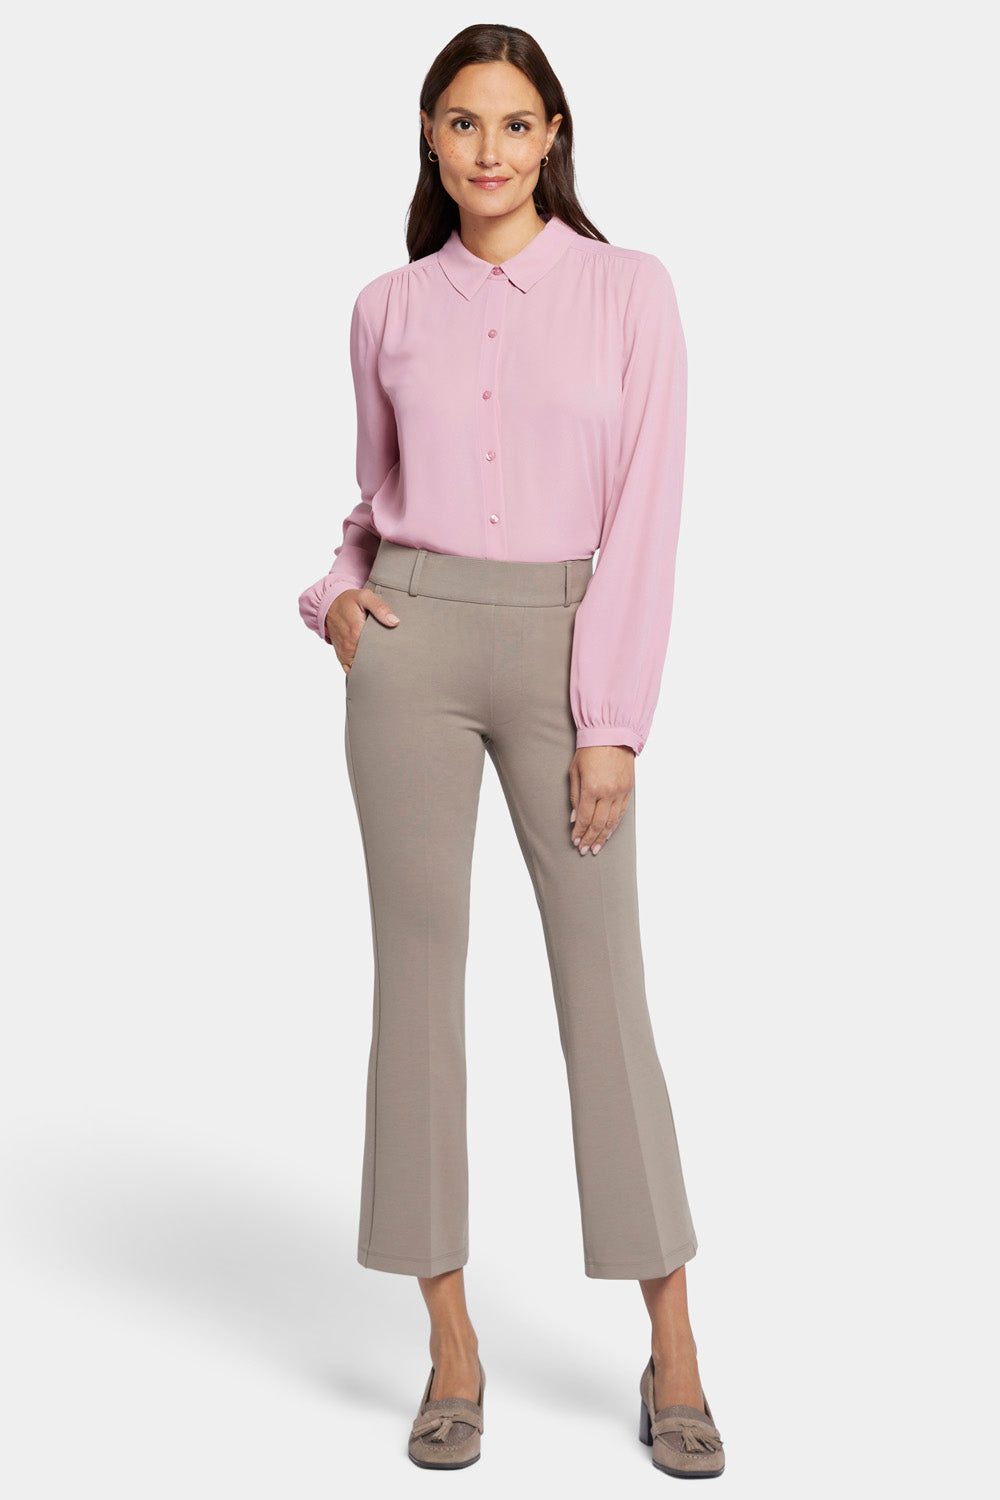 Pull-On Flared Ankle Trouser Pants Sculpt-Her™ Collection - Saddlewood Tan  | NYDJ